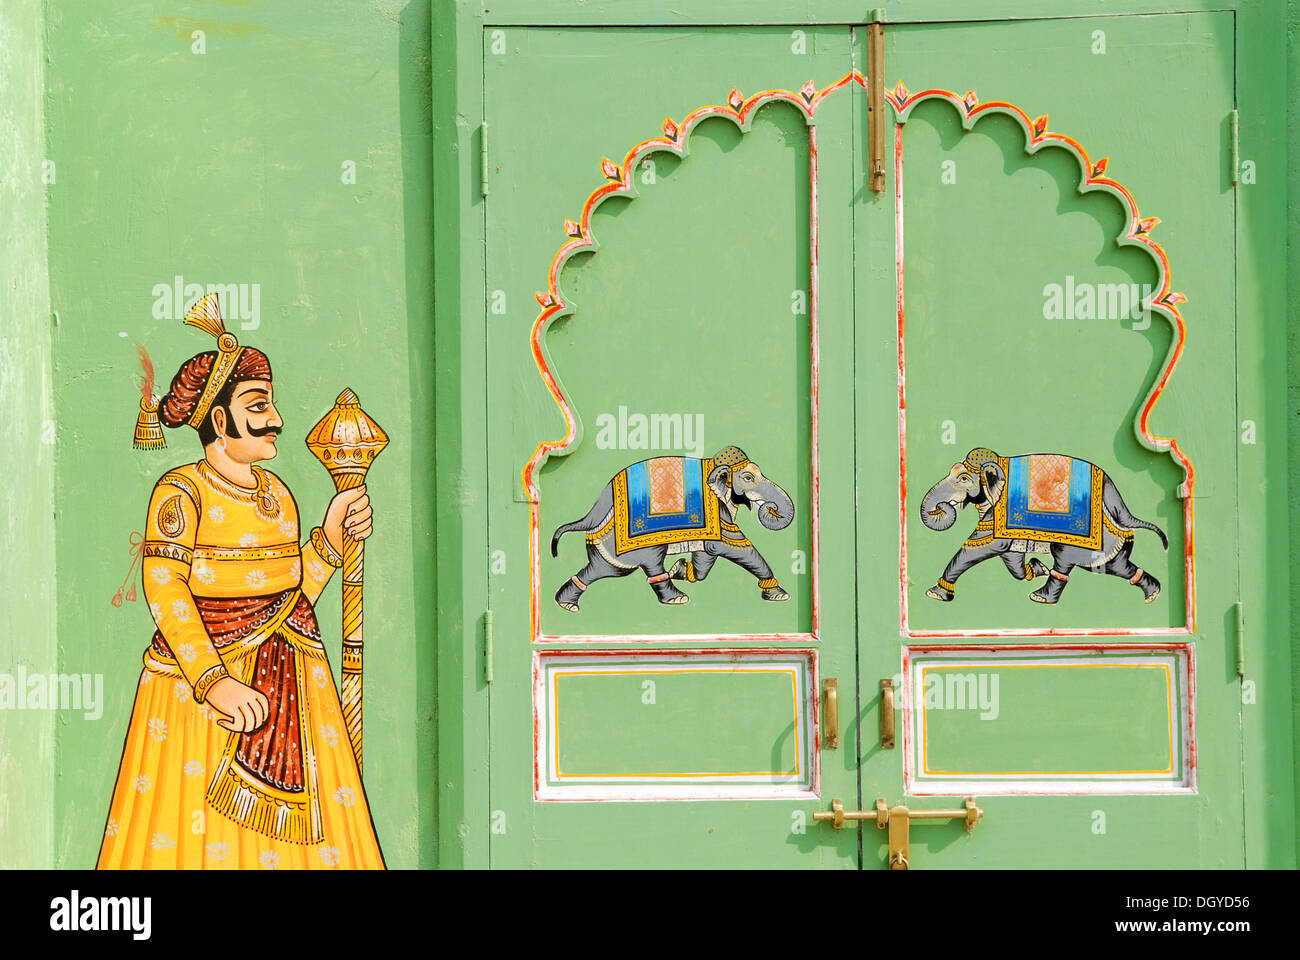 Painting on a green wall and door, elephants and Rajput, Shiv Niwas, city palace of Udaipur, Rajasthan, North India, India, Asia Stock Photo